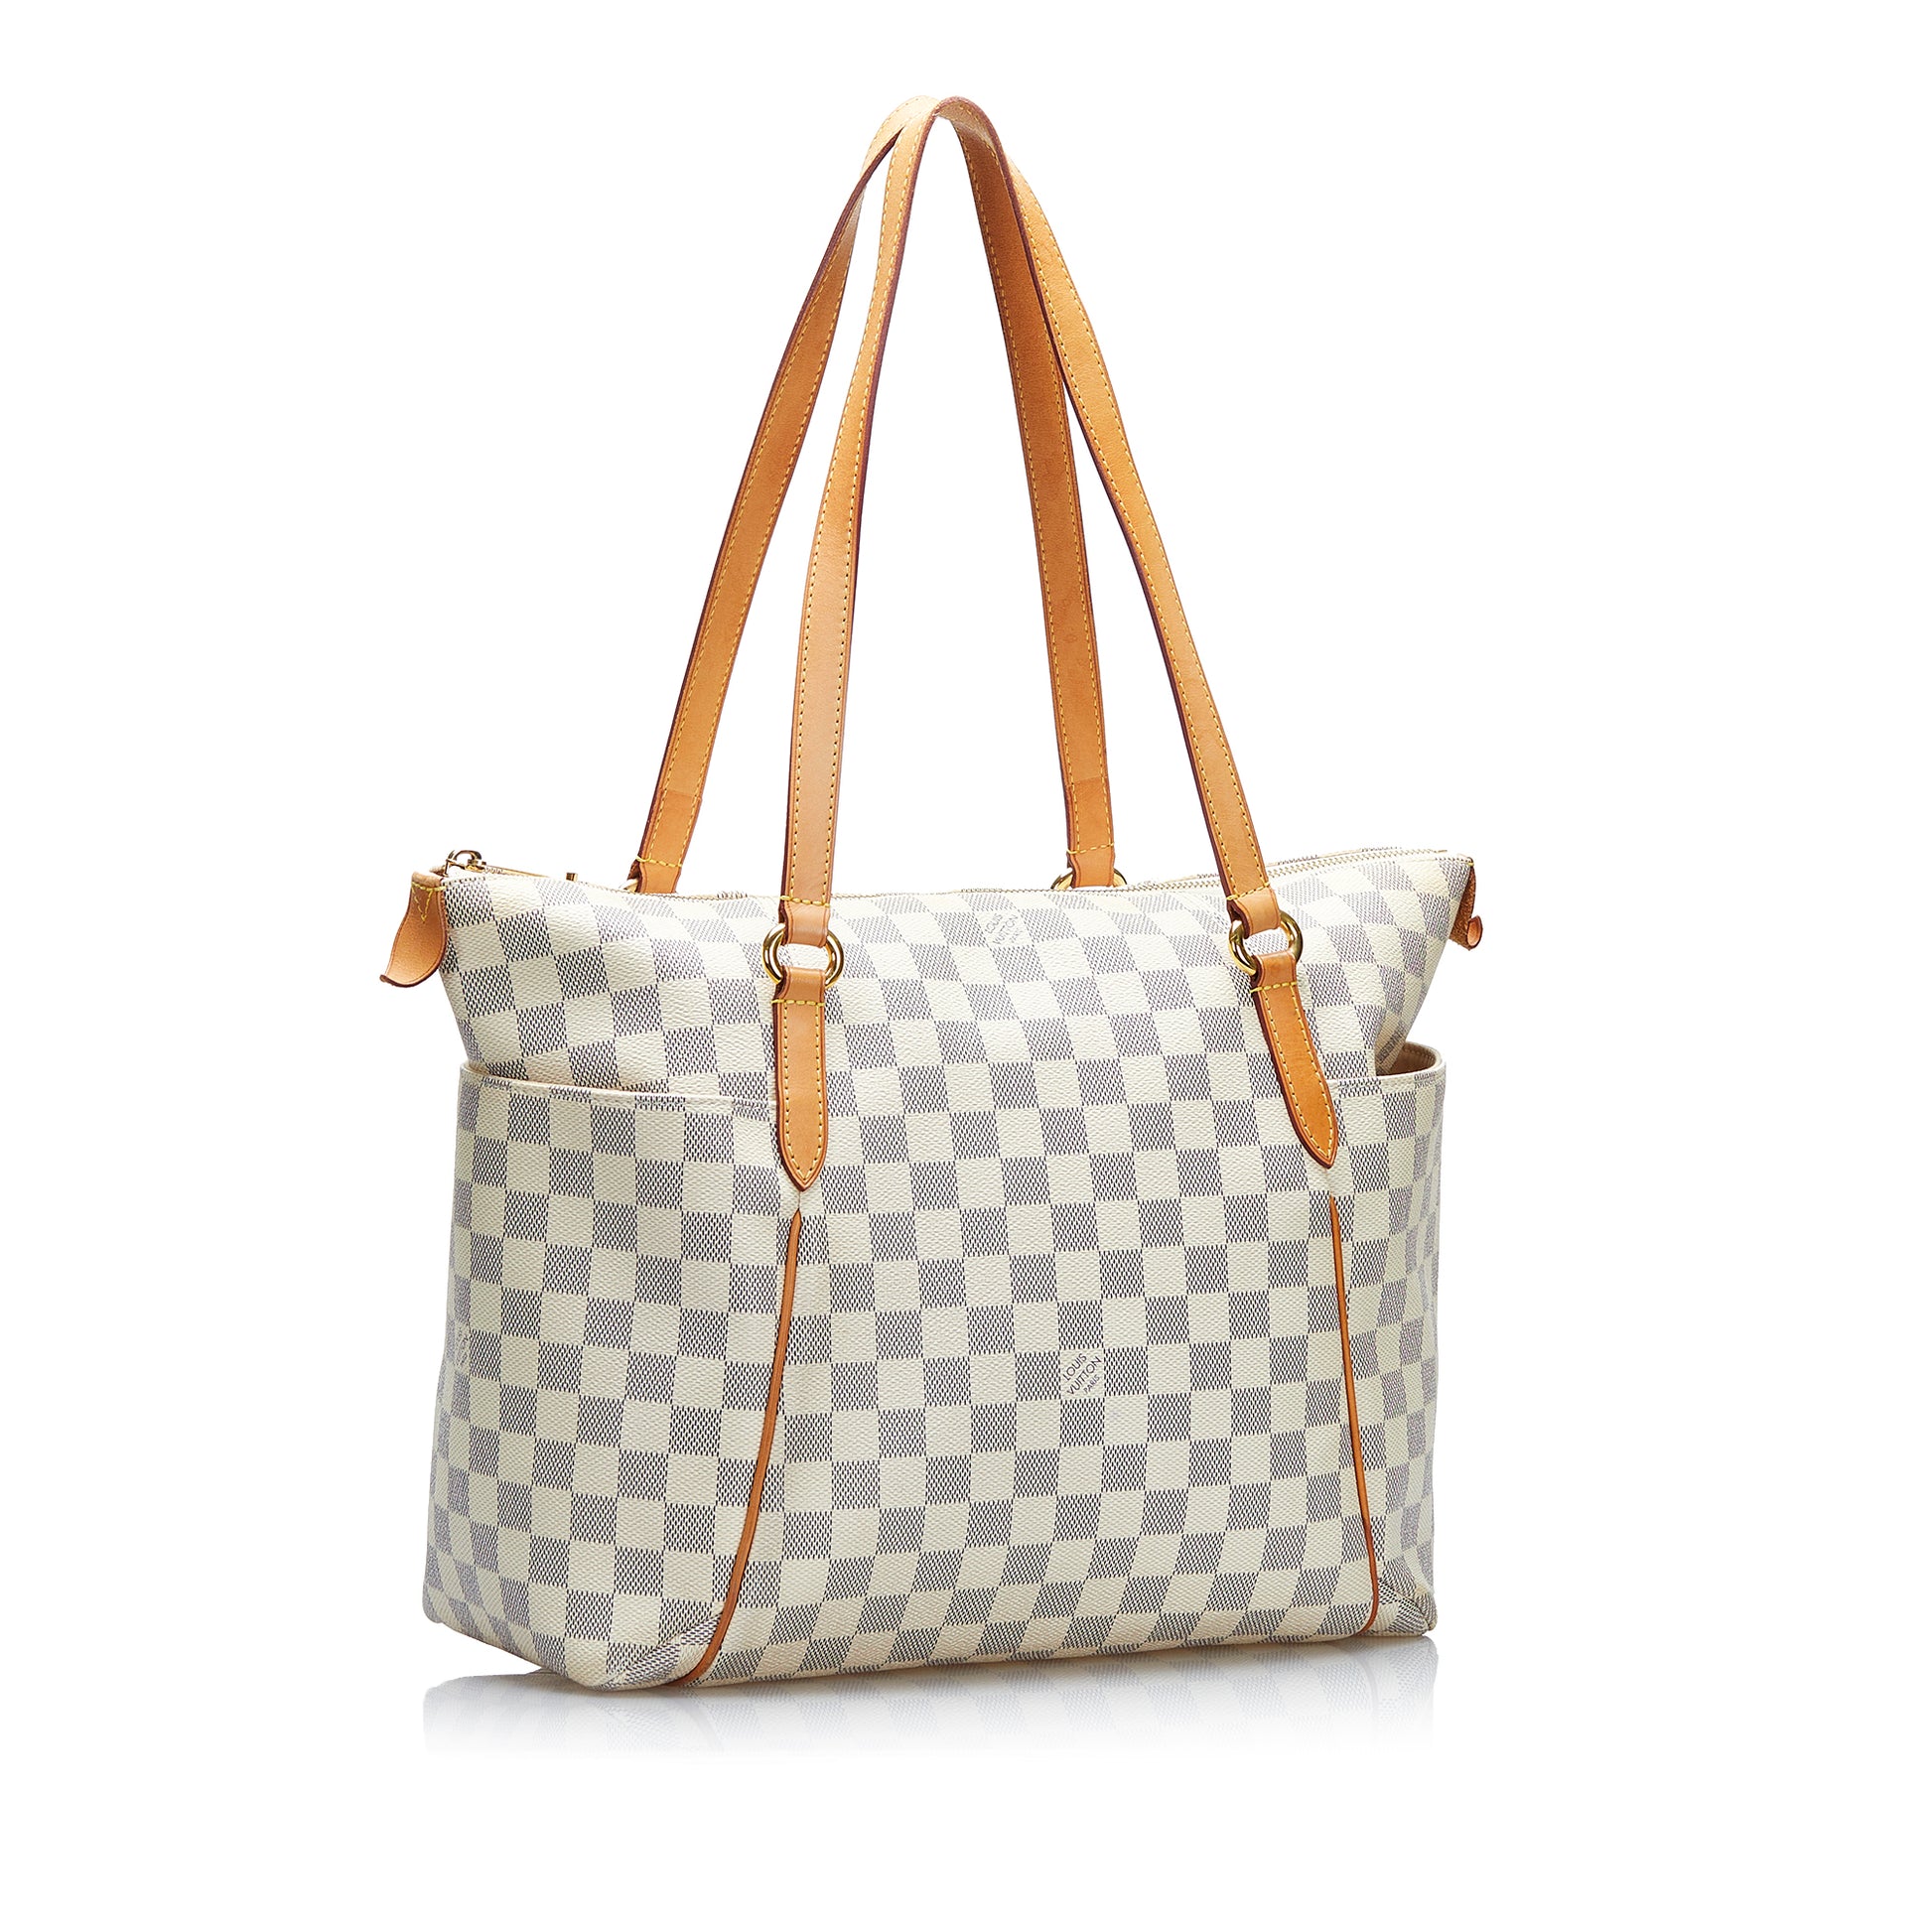 LOUIS VUITTON Totally GM White Checkered Coated Canvas Shoulder Bag Tote Bag